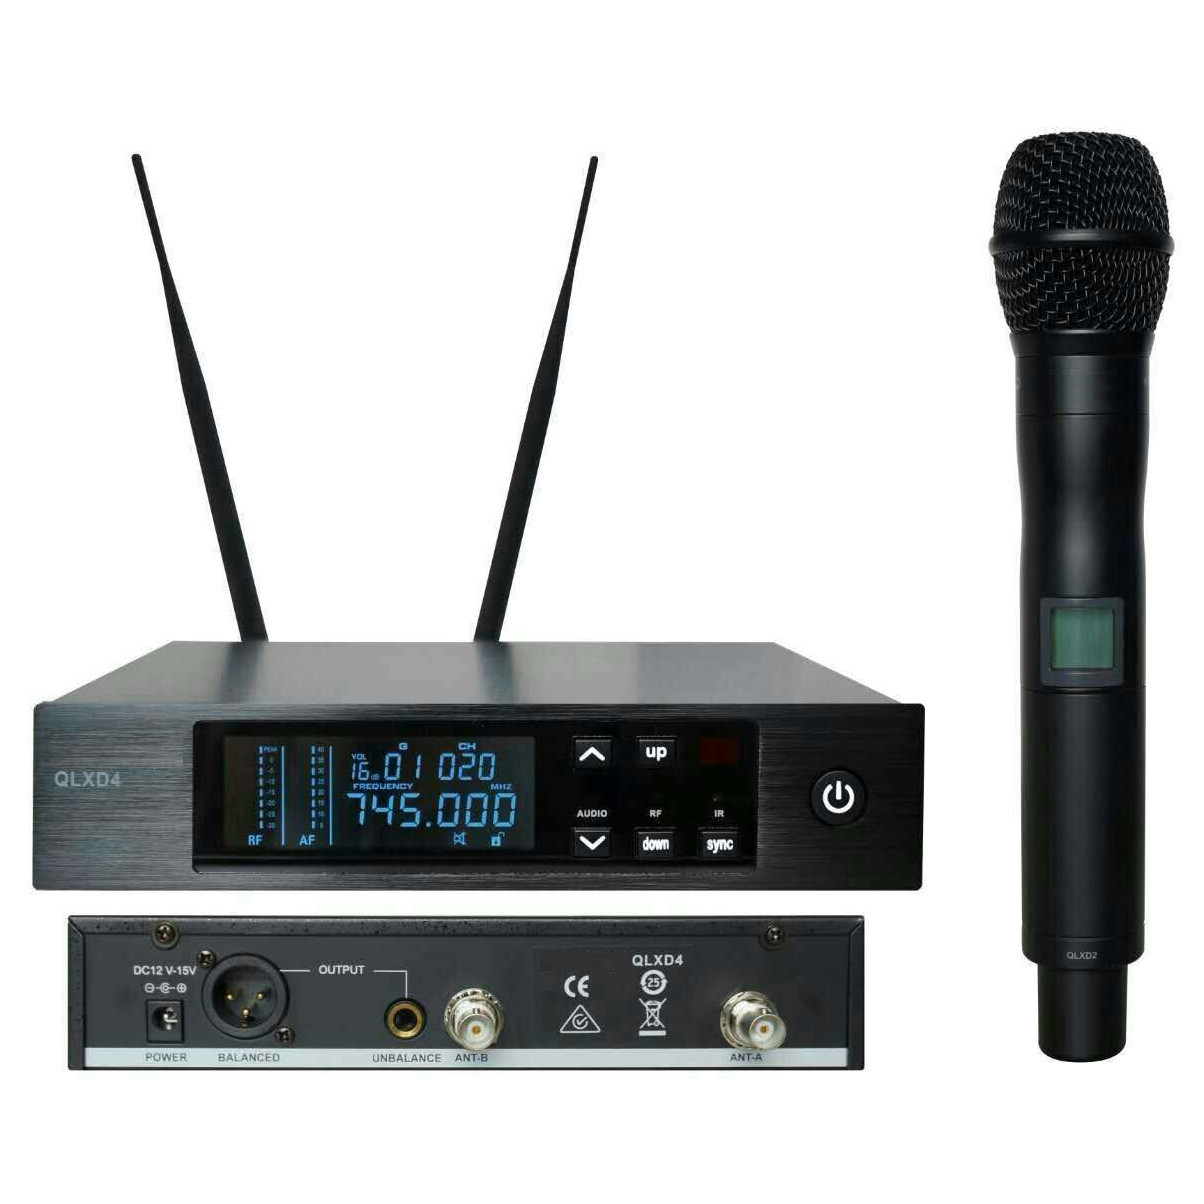 Using QLXD4 wireless microphone at the stage